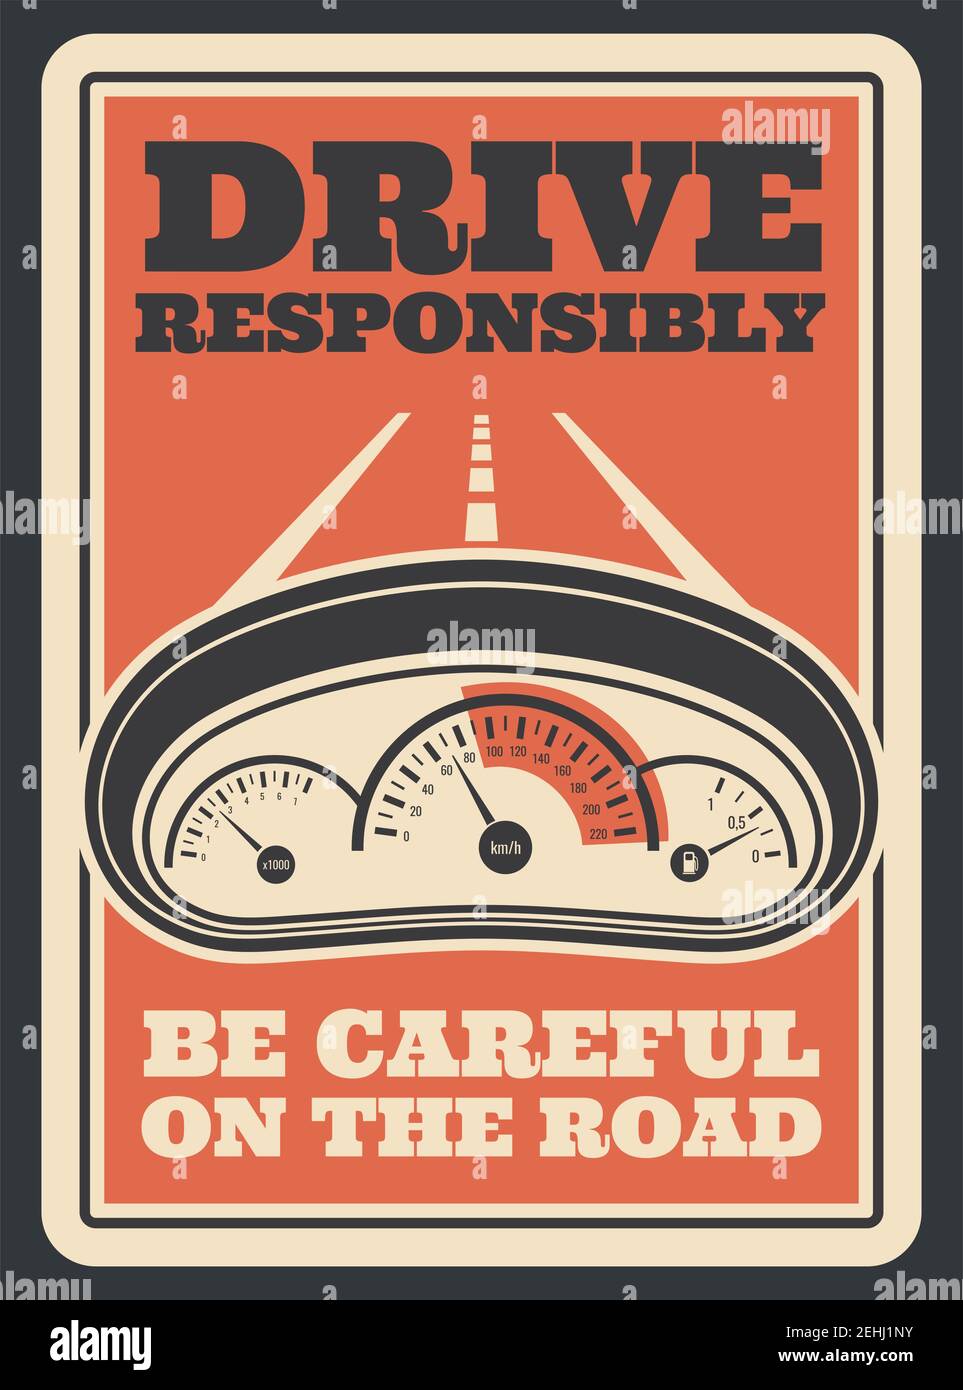 Premium Vector  Road safety tips sign or poster vector